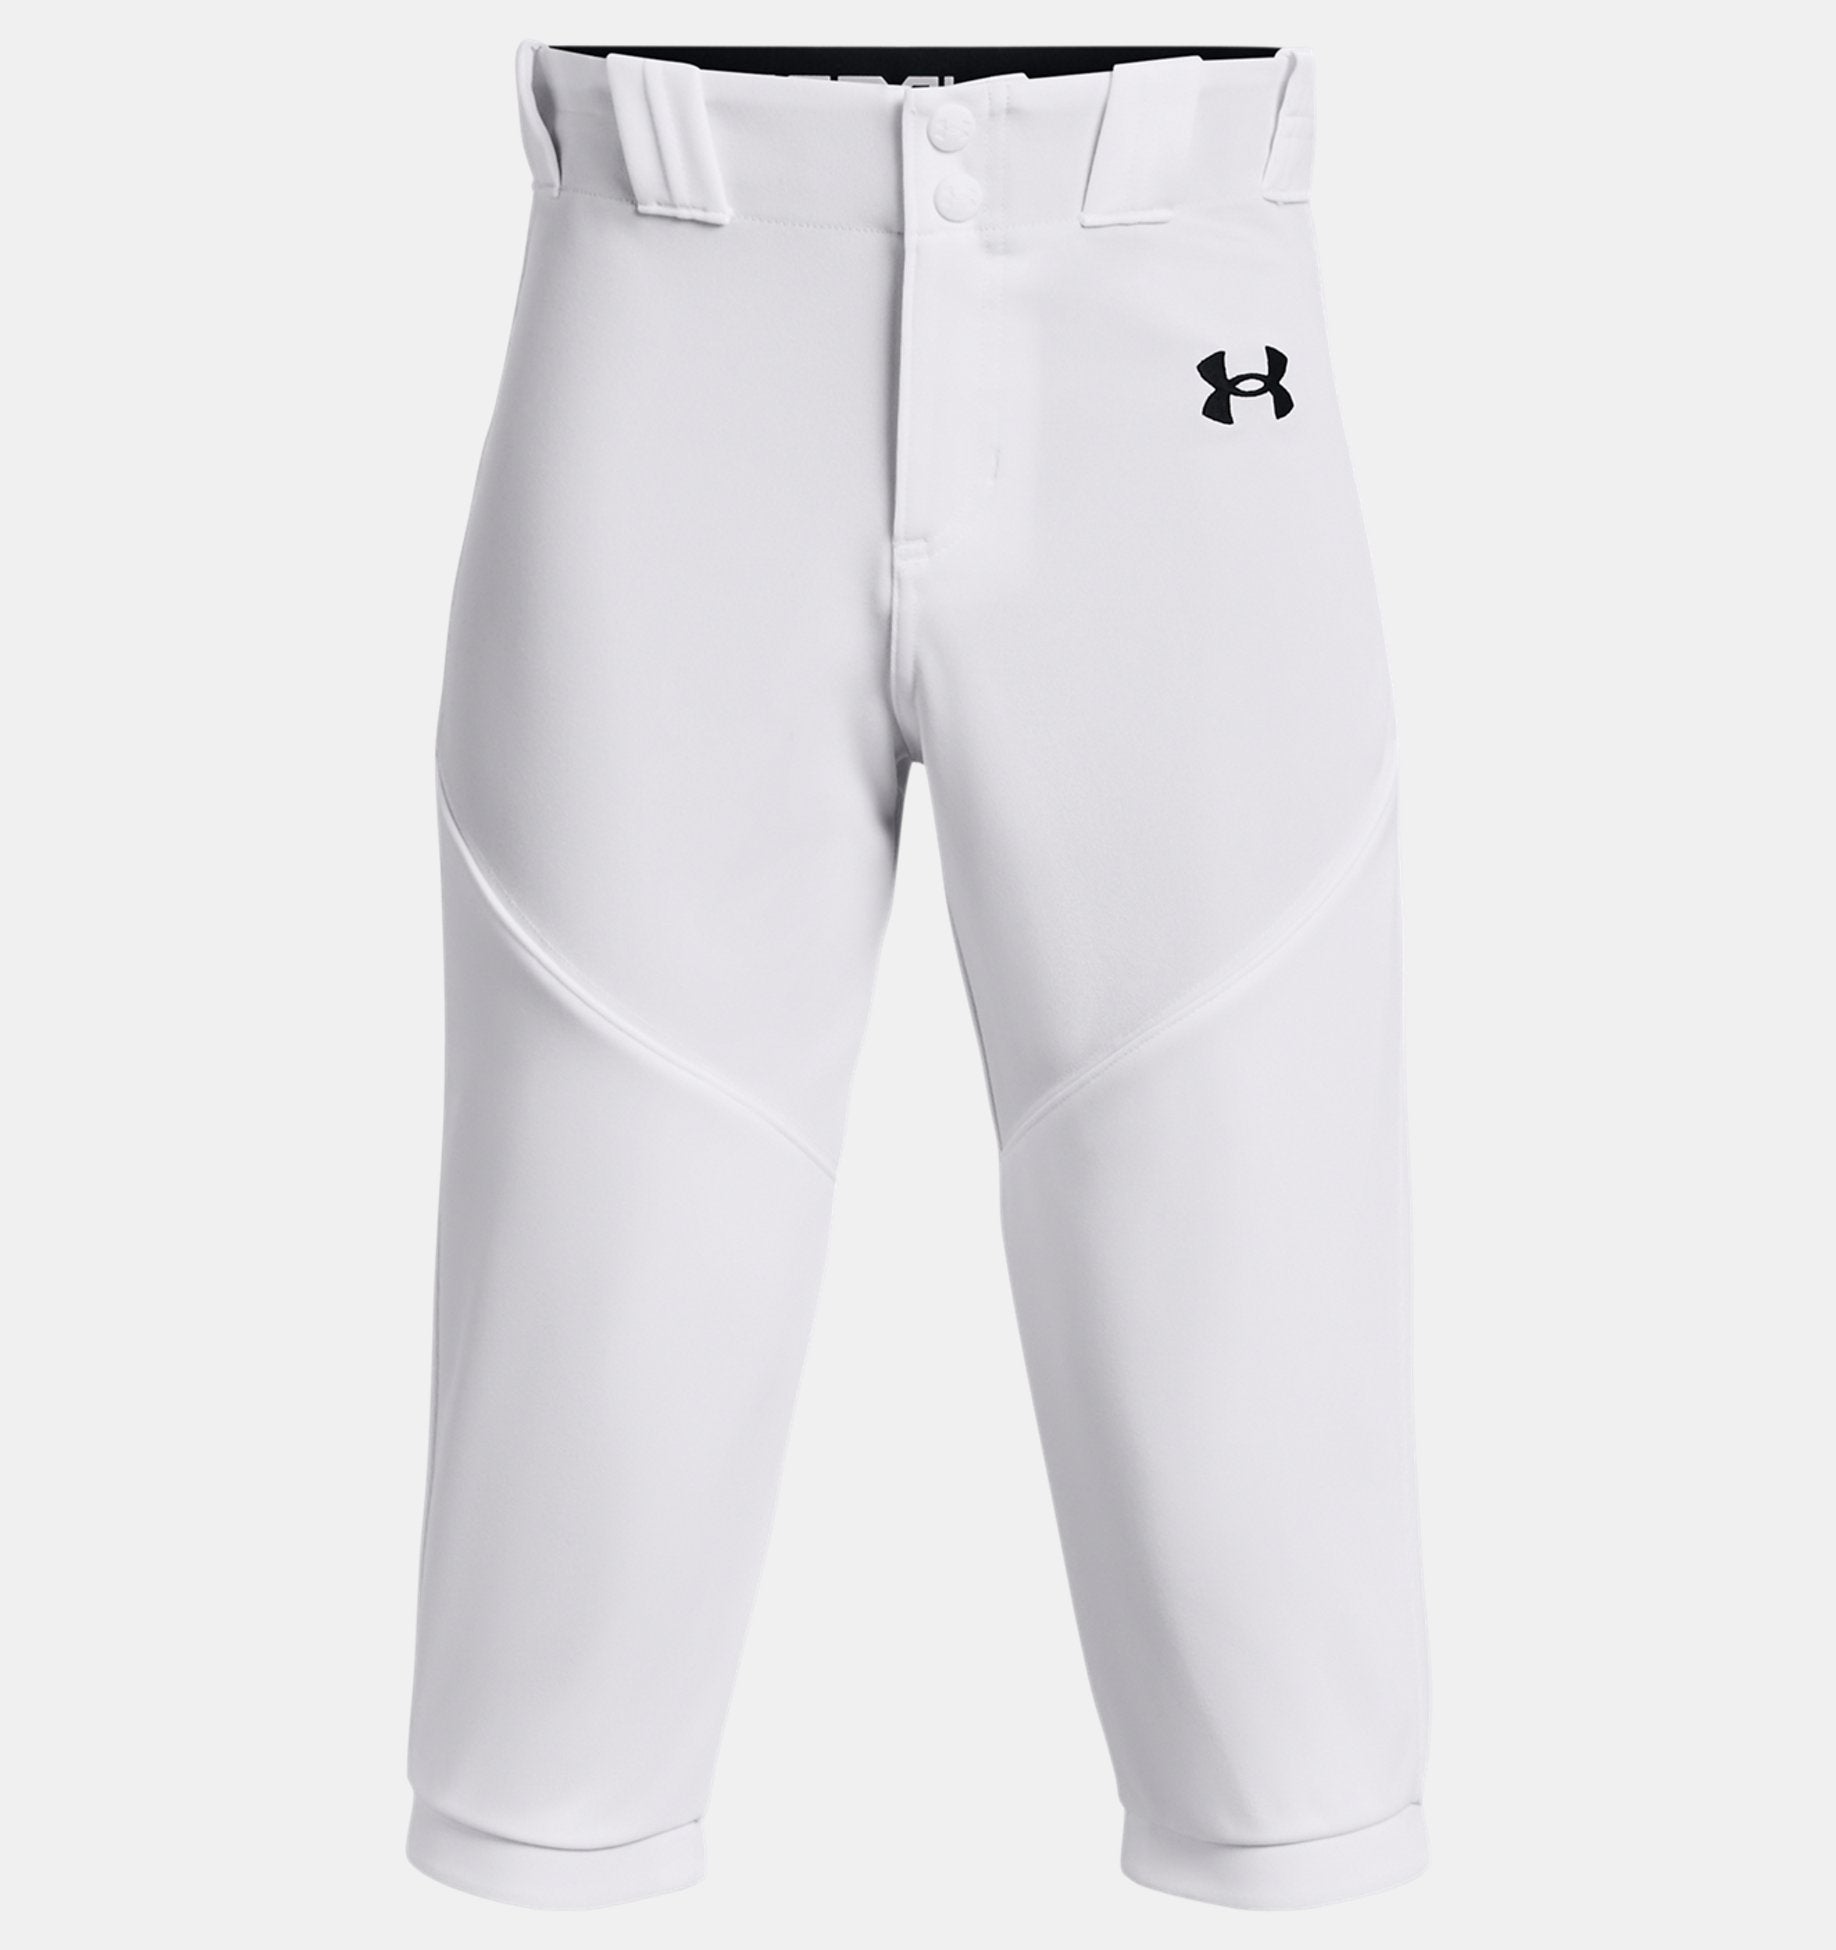 Under Armour Youth Utility Baseball Knickers-Sports Replay - Sports Excellence-Sports Replay - Sports Excellence